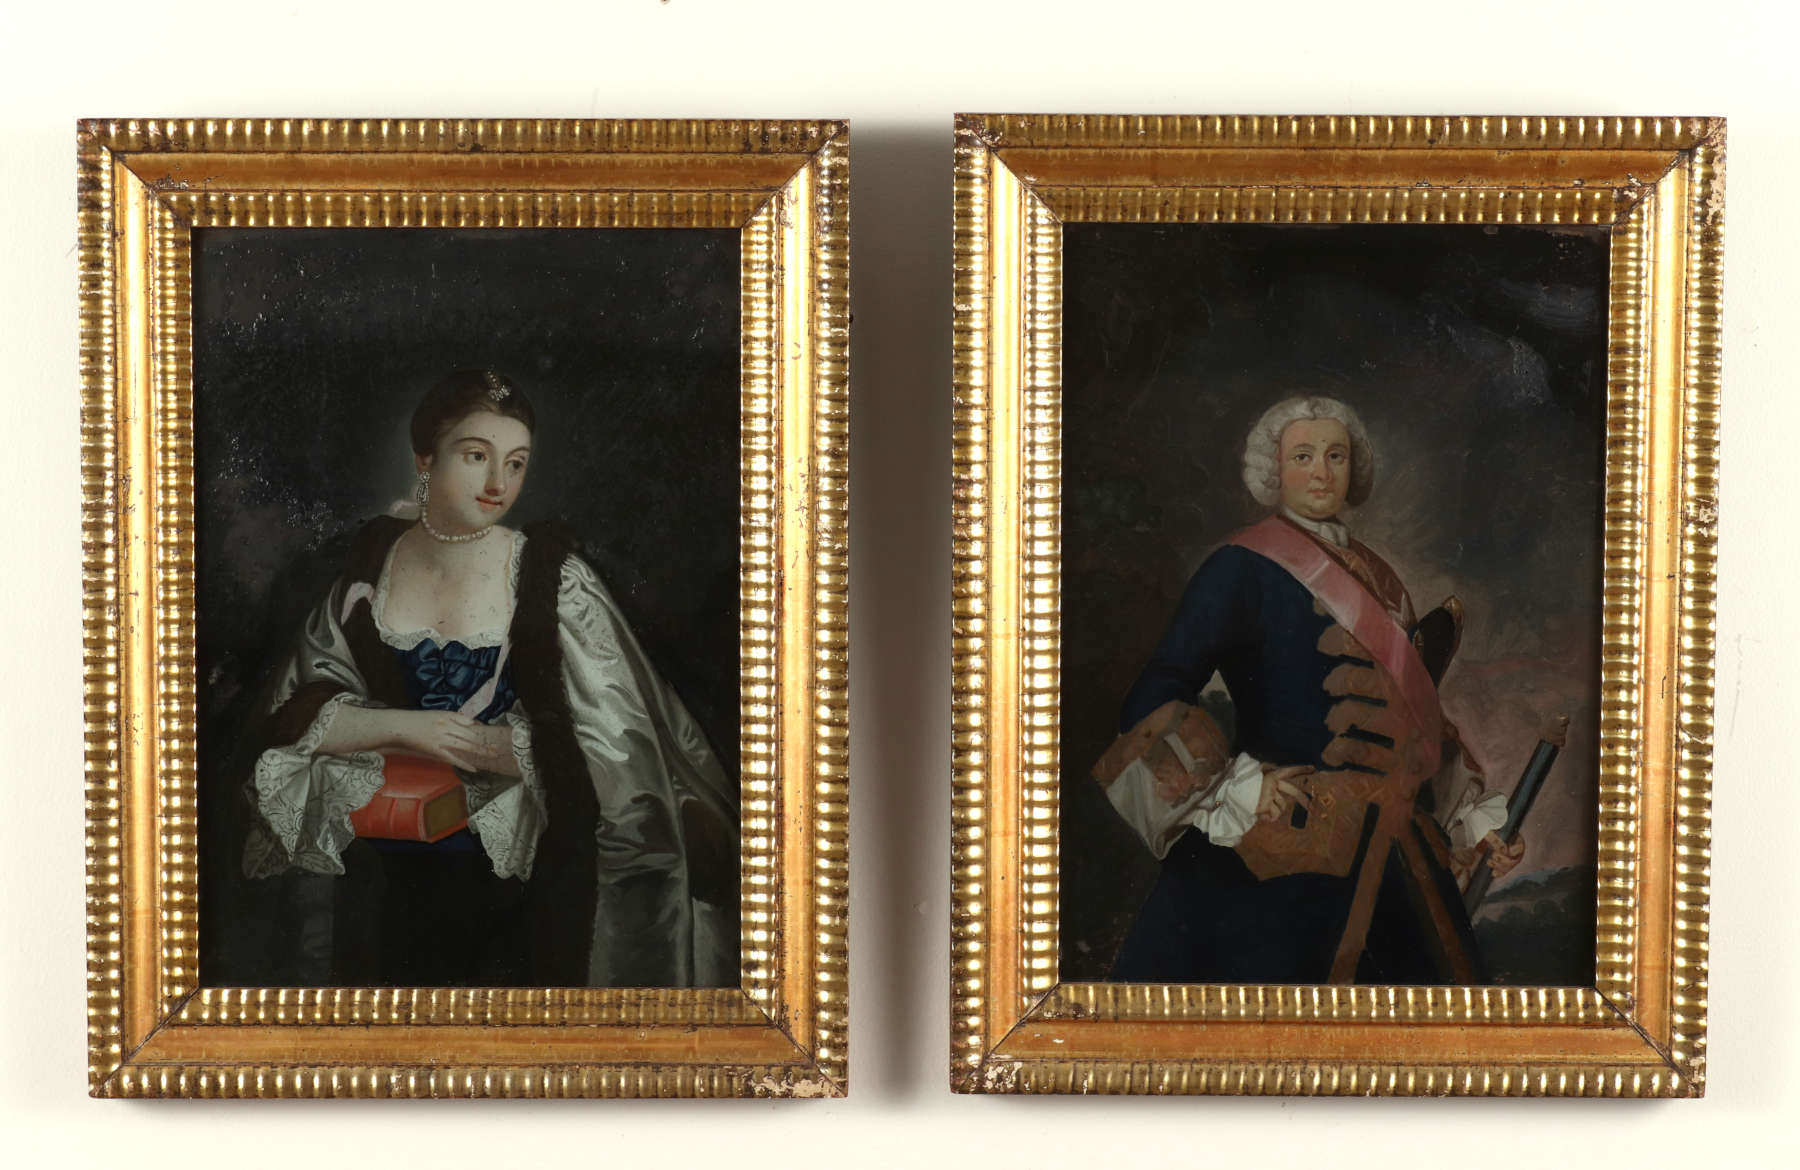 Pair of Chinese Export Reverse Glass Portraits, c. 1800